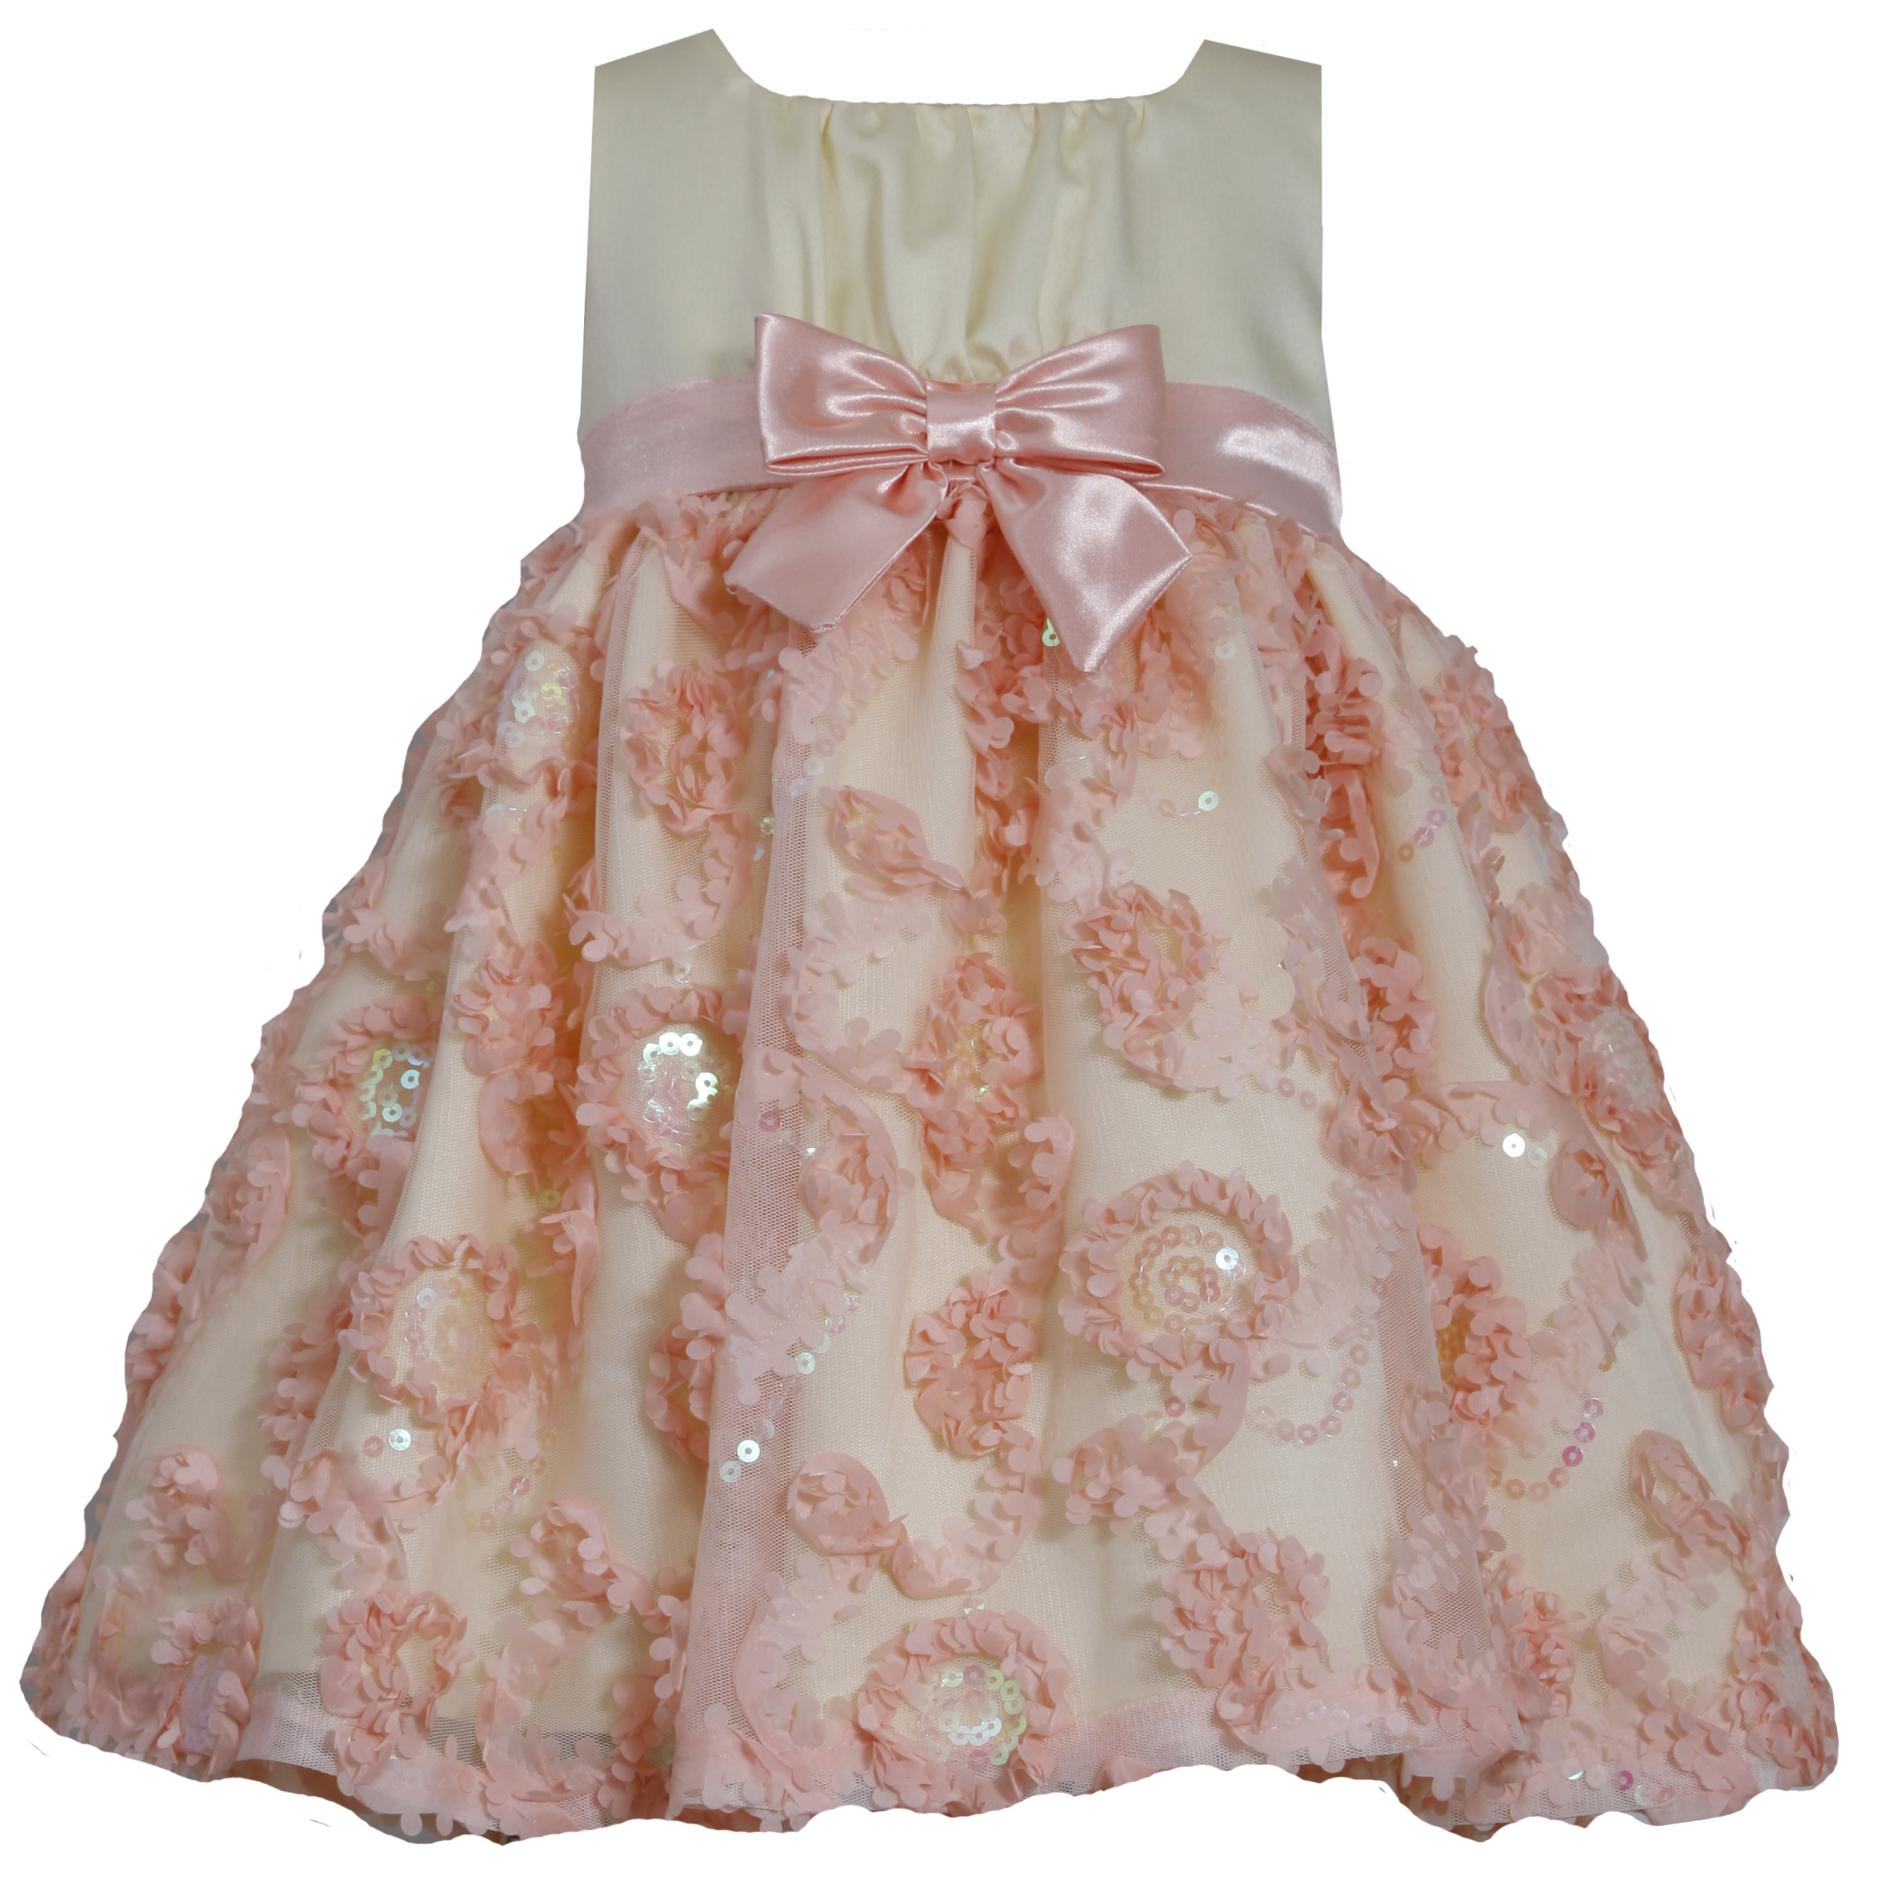 Ashley Ann Infant & Toddler Girl's Sequined Soutache Party Dress